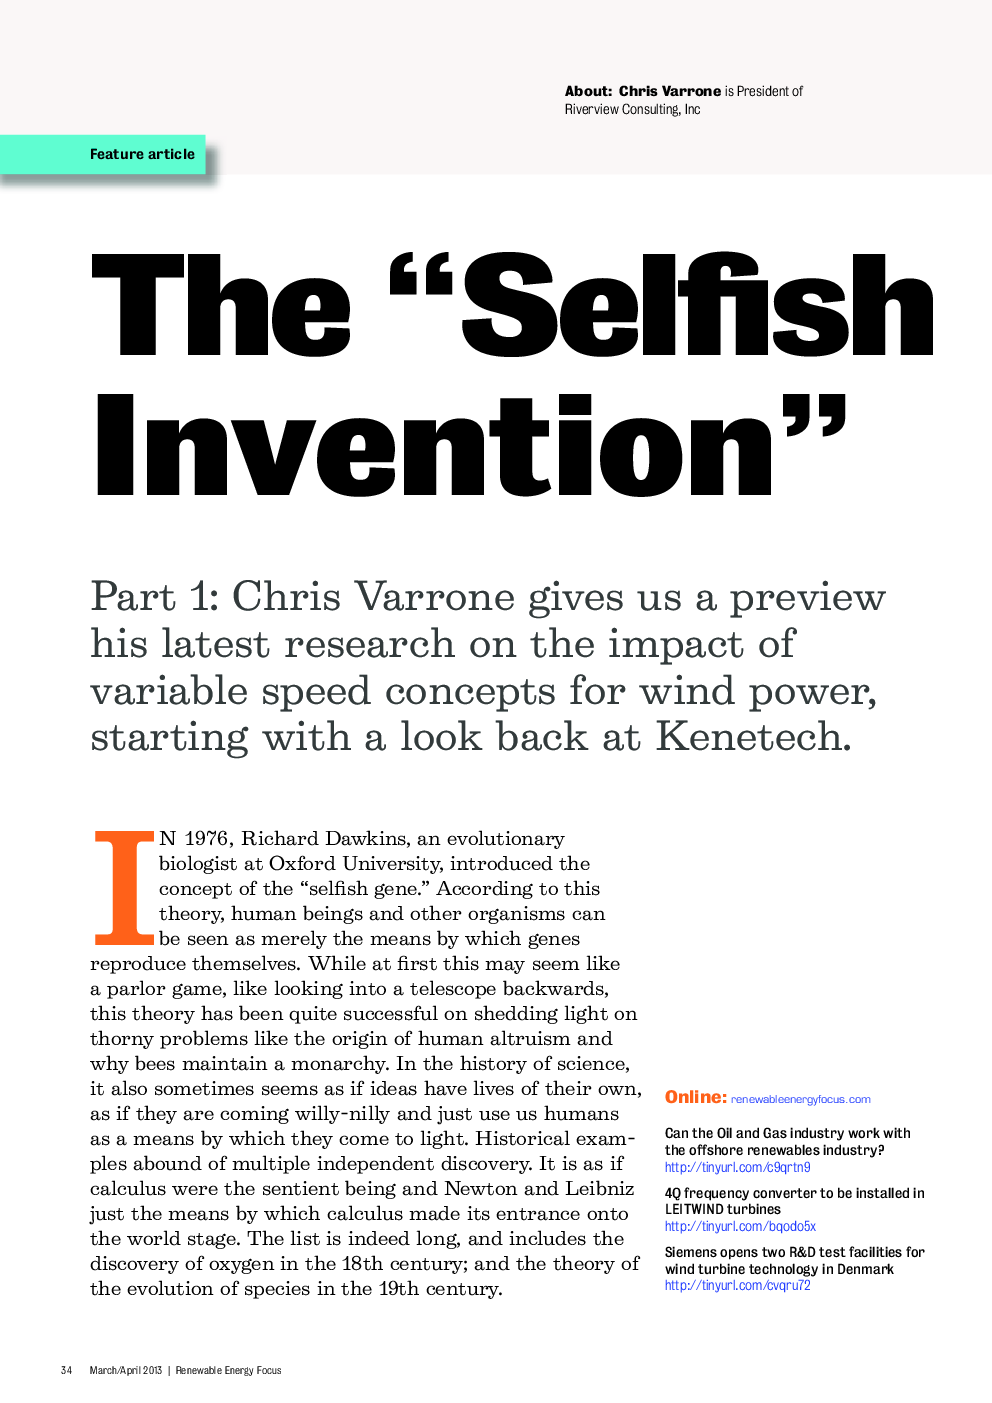 The “Selfish Invention”